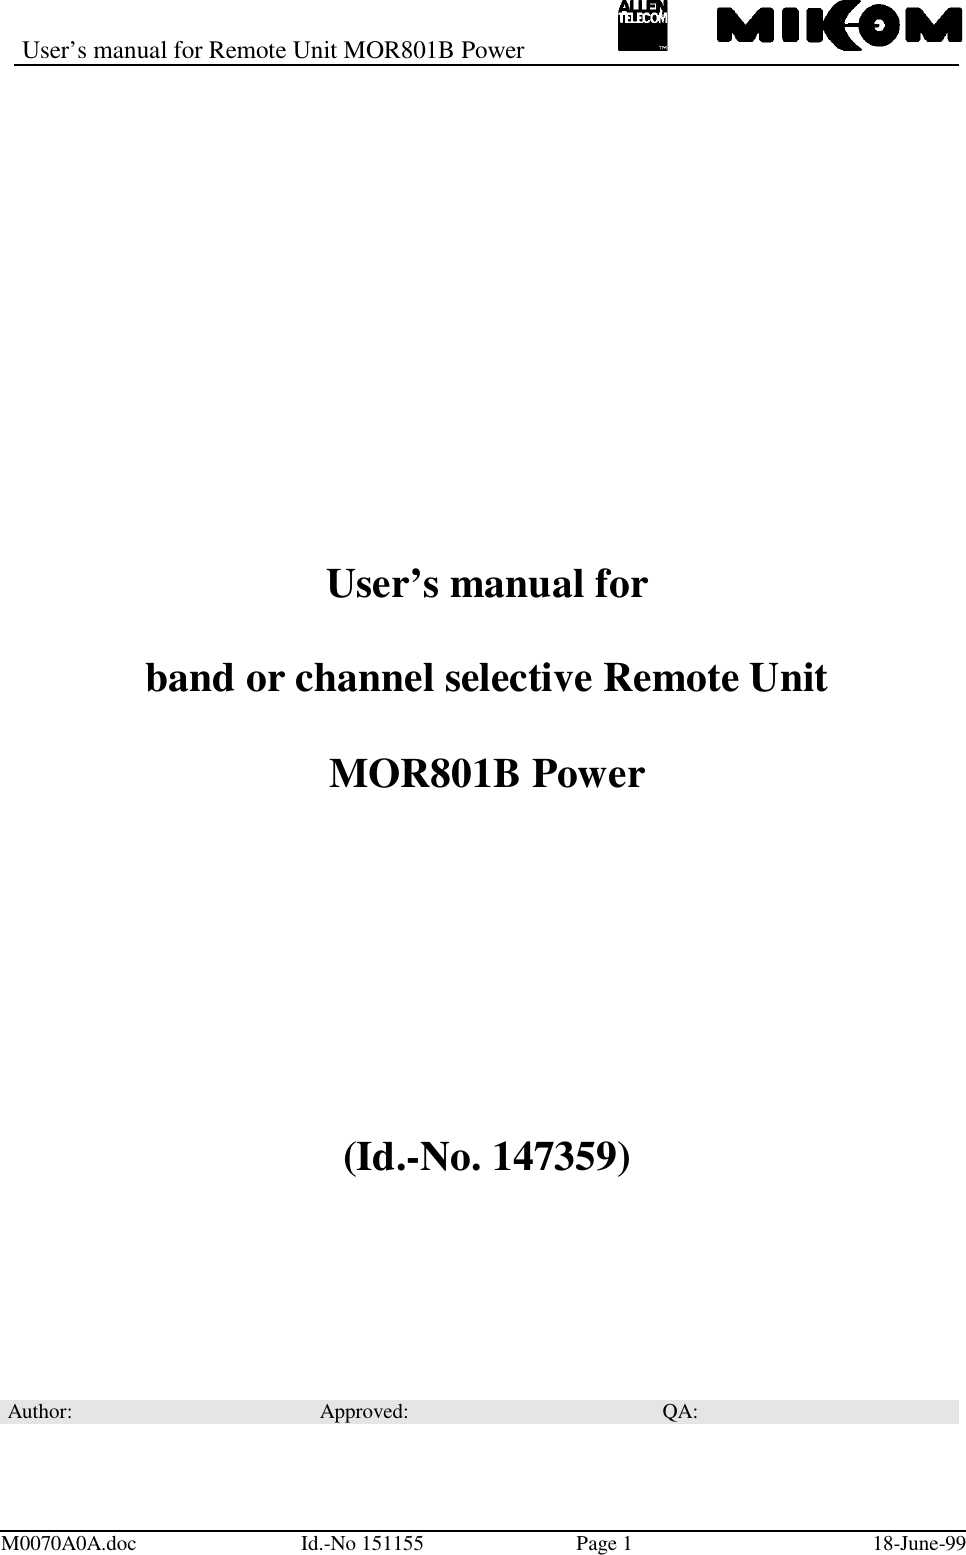 User’s manual for Remote Unit MOR801B PowerM0070A0A.doc Id.-No 151155 Page 1 18-June-99User’s manual forband or channel selective Remote UnitMOR801B Power(Id.-No. 147359)Author: Approved: QA: